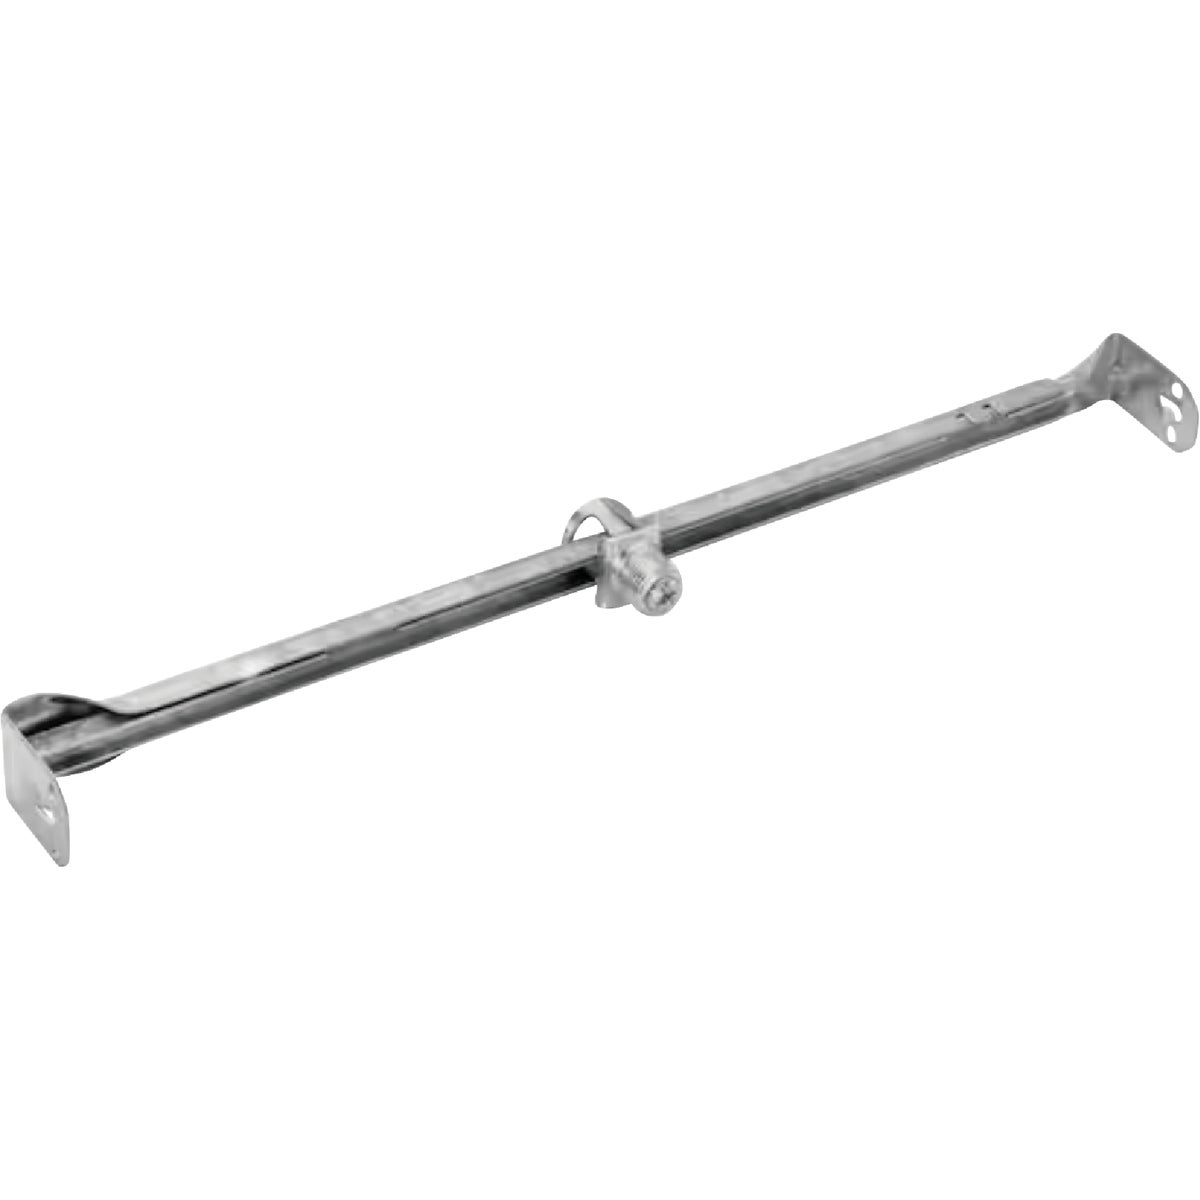 Southwire 16 to 24 In. Adjustable Steel Bar Hanger